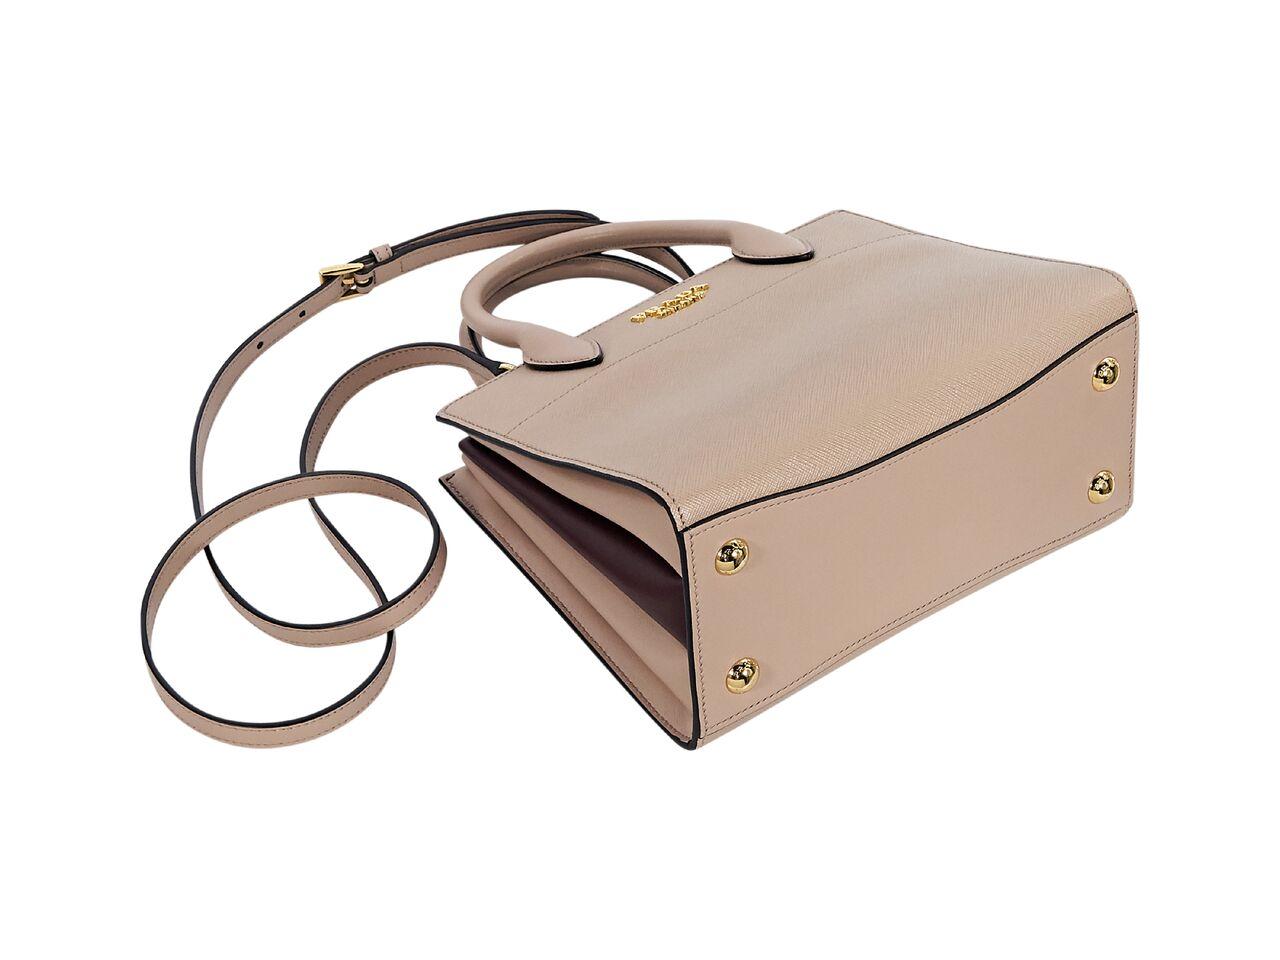 Product details:  Light beige saffiano leather satchel by Prada.  Dual carry handles.  Detachable, adjustable crossbody strap.  Open top.  Leather lined interior with inner open compartments and inner slide pocket.  Protective metal feet.  Goldtone